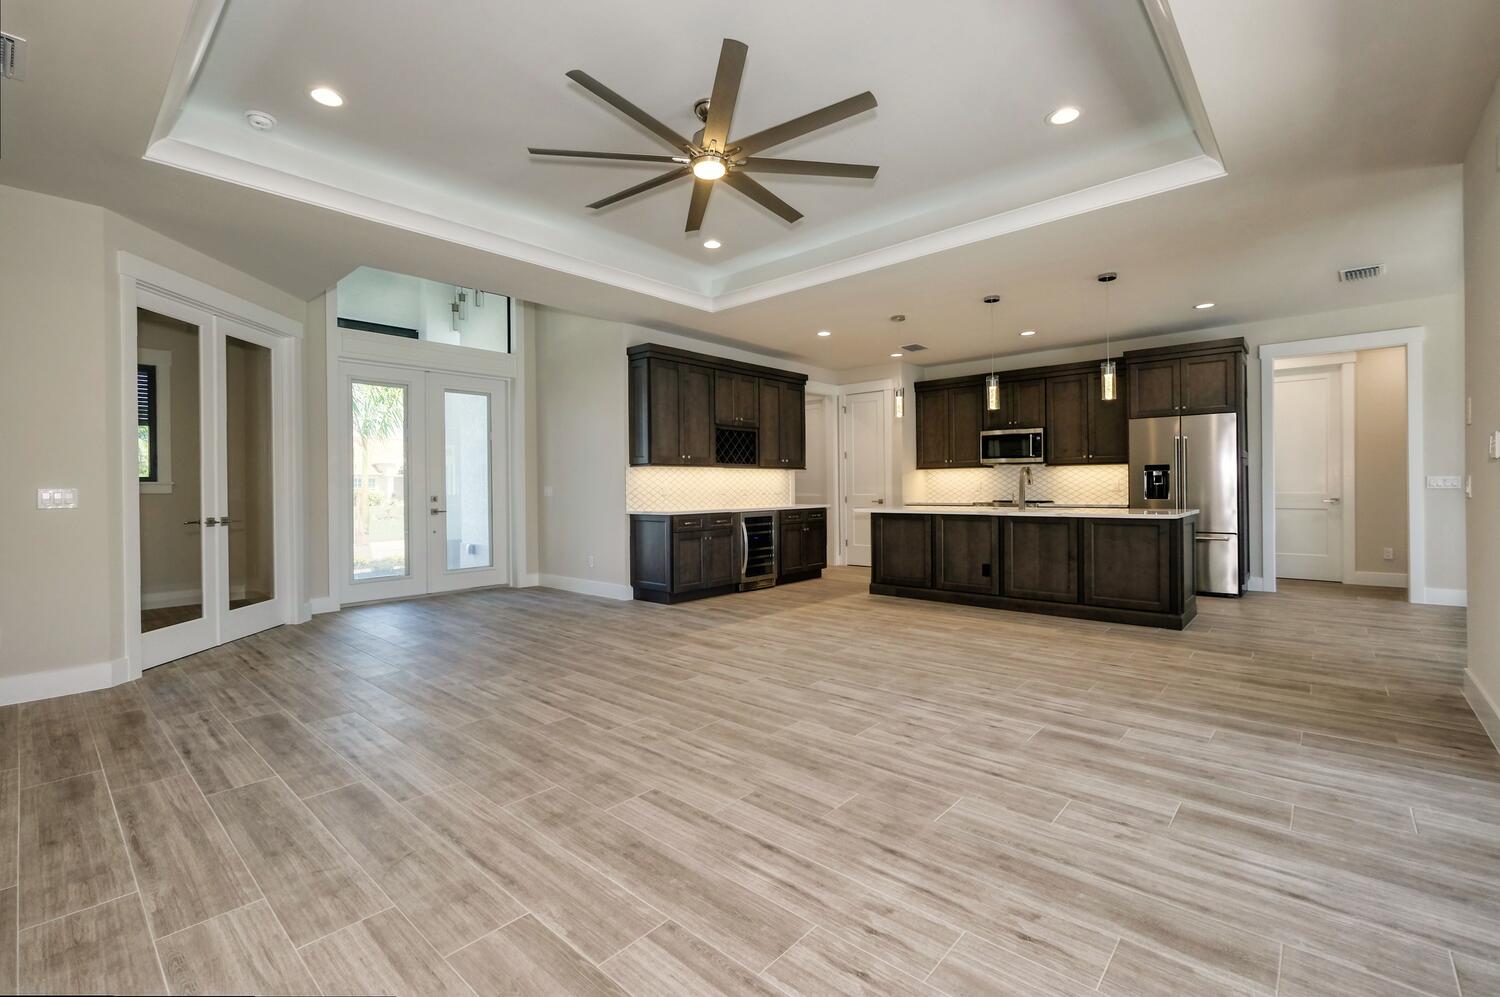 Picture of the entrance, office, kitchen and living room of the model home Serenity